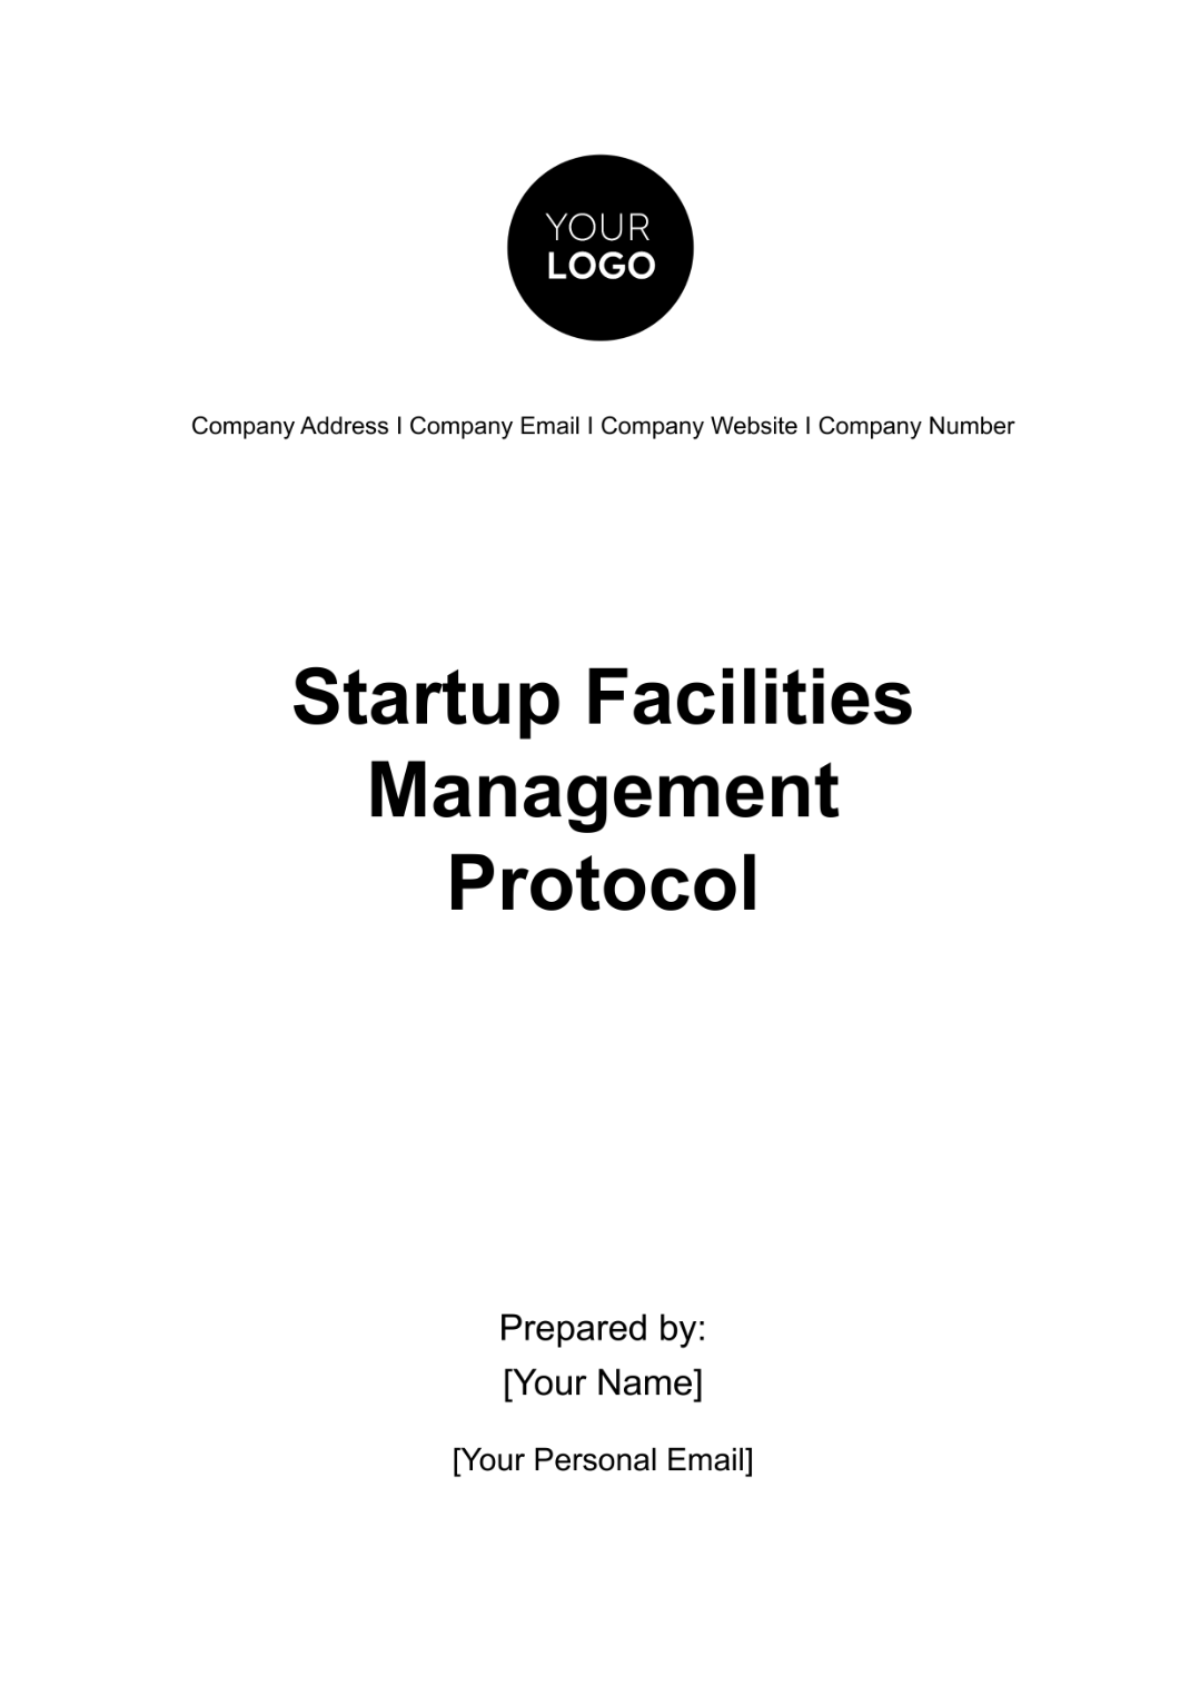 Startup Facilities Management Protocol Template